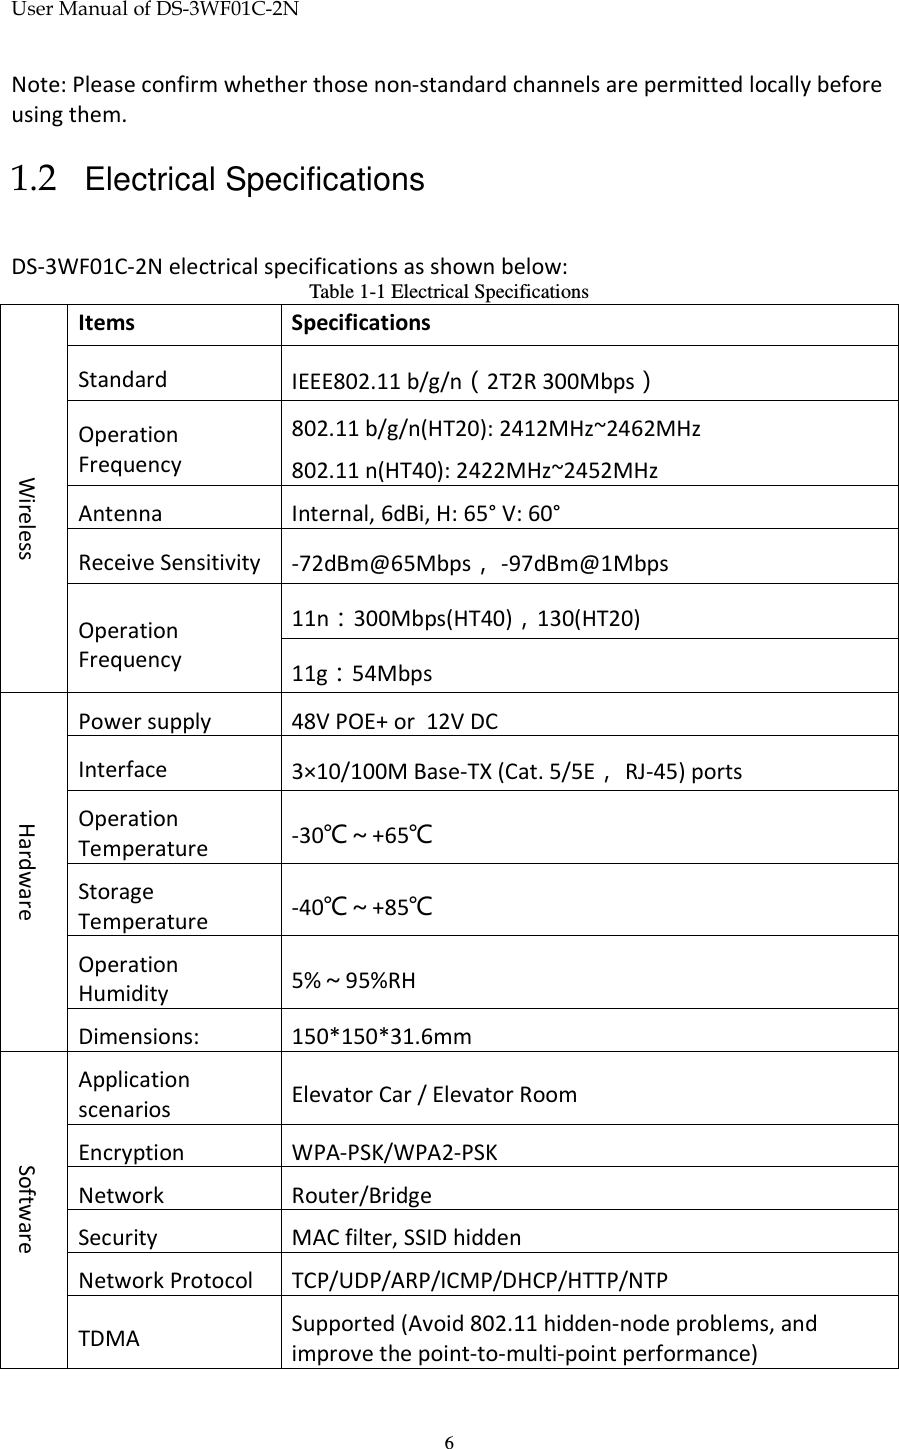 User Manual of DS-3WF01C-2N   6Note: Please confirm whether those non-standard channels are permitted locally before using them. 1.2 Electrical Specifications DS-3WF01C-2N electrical specifications as shown below: Table 1-1 Electrical Specifications  Items  Specifications Wireless Standard  IEEE802.11 b/g/n（2T2R 300Mbps） Operation Frequency 802.11 b/g/n(HT20): 2412MHz~2462MHz 802.11 n(HT40): 2422MHz~2452MHz Antenna Internal, 6dBi, H: 65° V: 60° Receive Sensitivity  -72dBm@65Mbps， -97dBm@1Mbps Operation Frequency 11n：300Mbps(HT40)，130(HT20) 11g：54Mbps Hardware Power supply  48V POE+ or  12V DC Interface  3×10/100M Base-TX (Cat. 5/5E， RJ-45) ports Operation Temperature  -30℃～+65℃ Storage Temperature -40℃～+85℃ Operation Humidity 5%～95%RH  Dimensions:  150*150*31.6mm Software Application scenarios   Elevator Car / Elevator Room Encryption WPA-PSK/WPA2-PSK Network Router/Bridge Security MAC filter, SSID hidden Network Protocol  TCP/UDP/ARP/ICMP/DHCP/HTTP/NTP TDMA   Supported (Avoid 802.11 hidden-node problems, and improve the point-to-multi-point performance) 